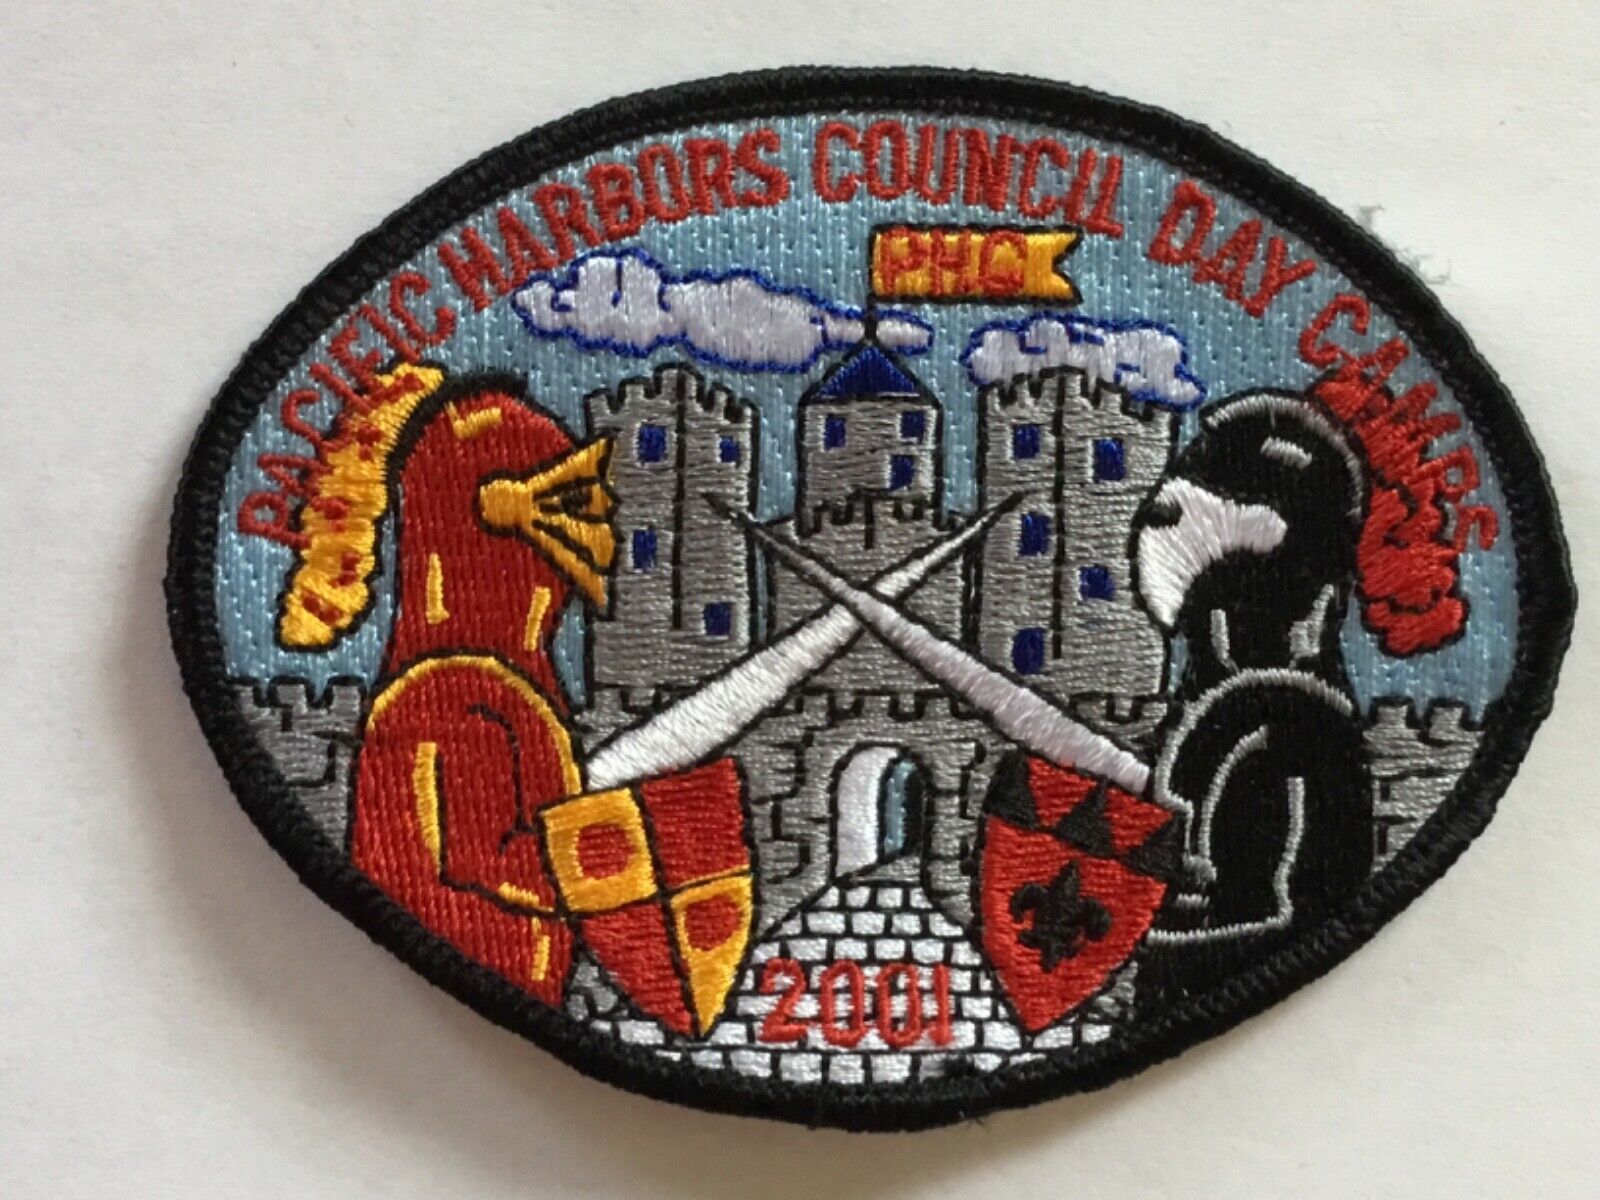 2001 Pacific Harbors Council Day Camp patch